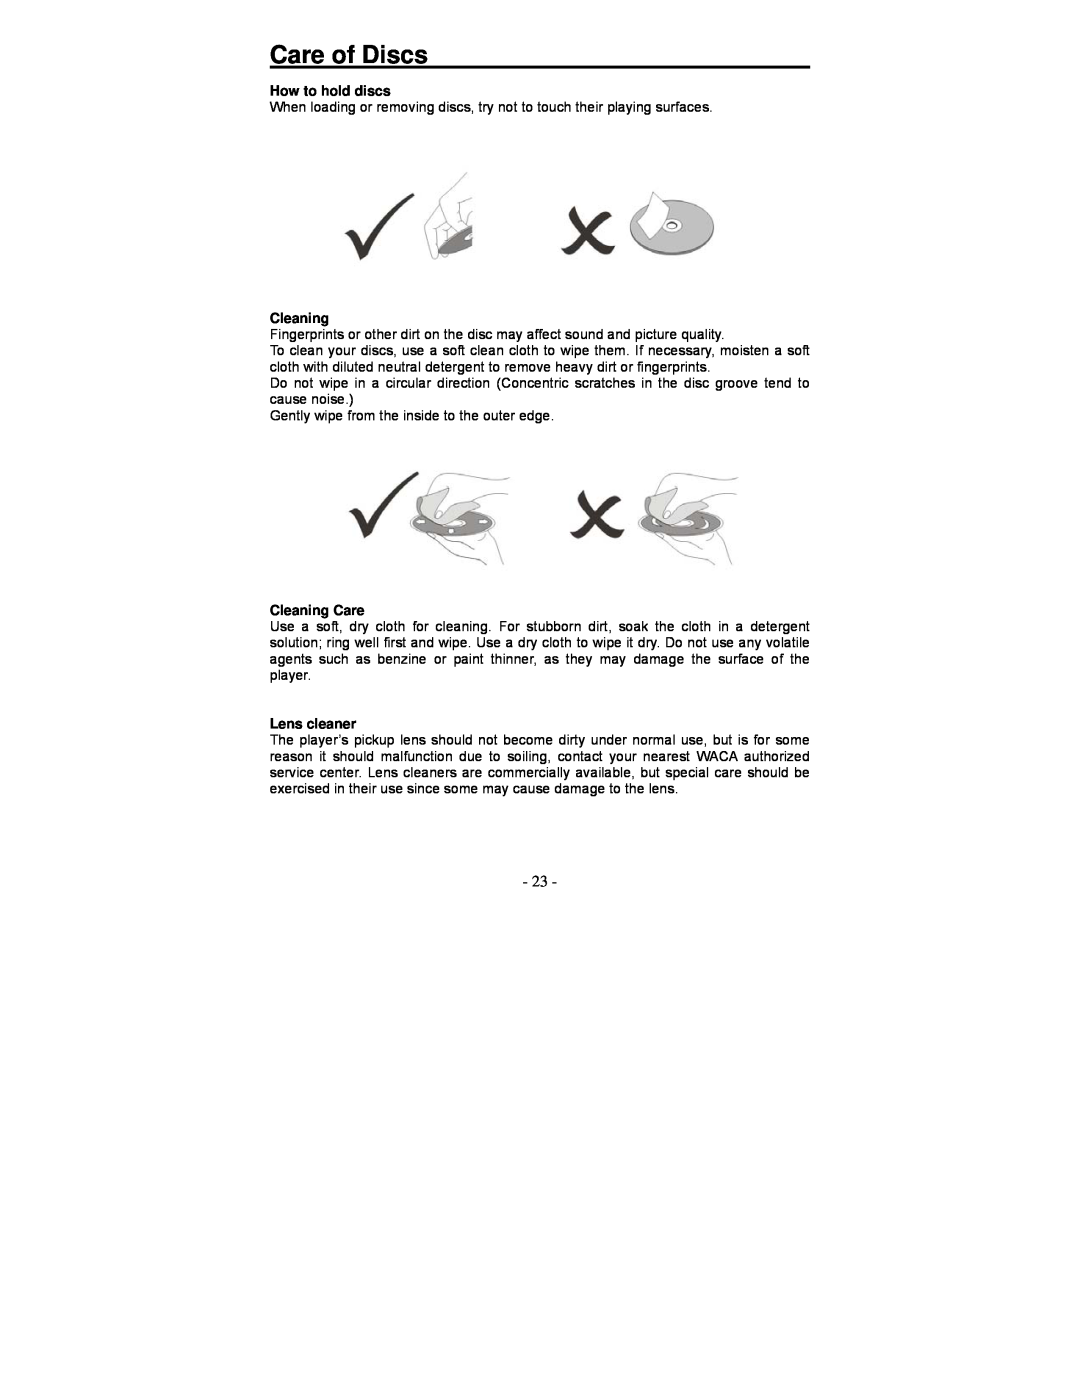 Polaroid PDV-0713A operation manual Care of Discs, How to hold discs, Cleaning Care, Lens cleaner 